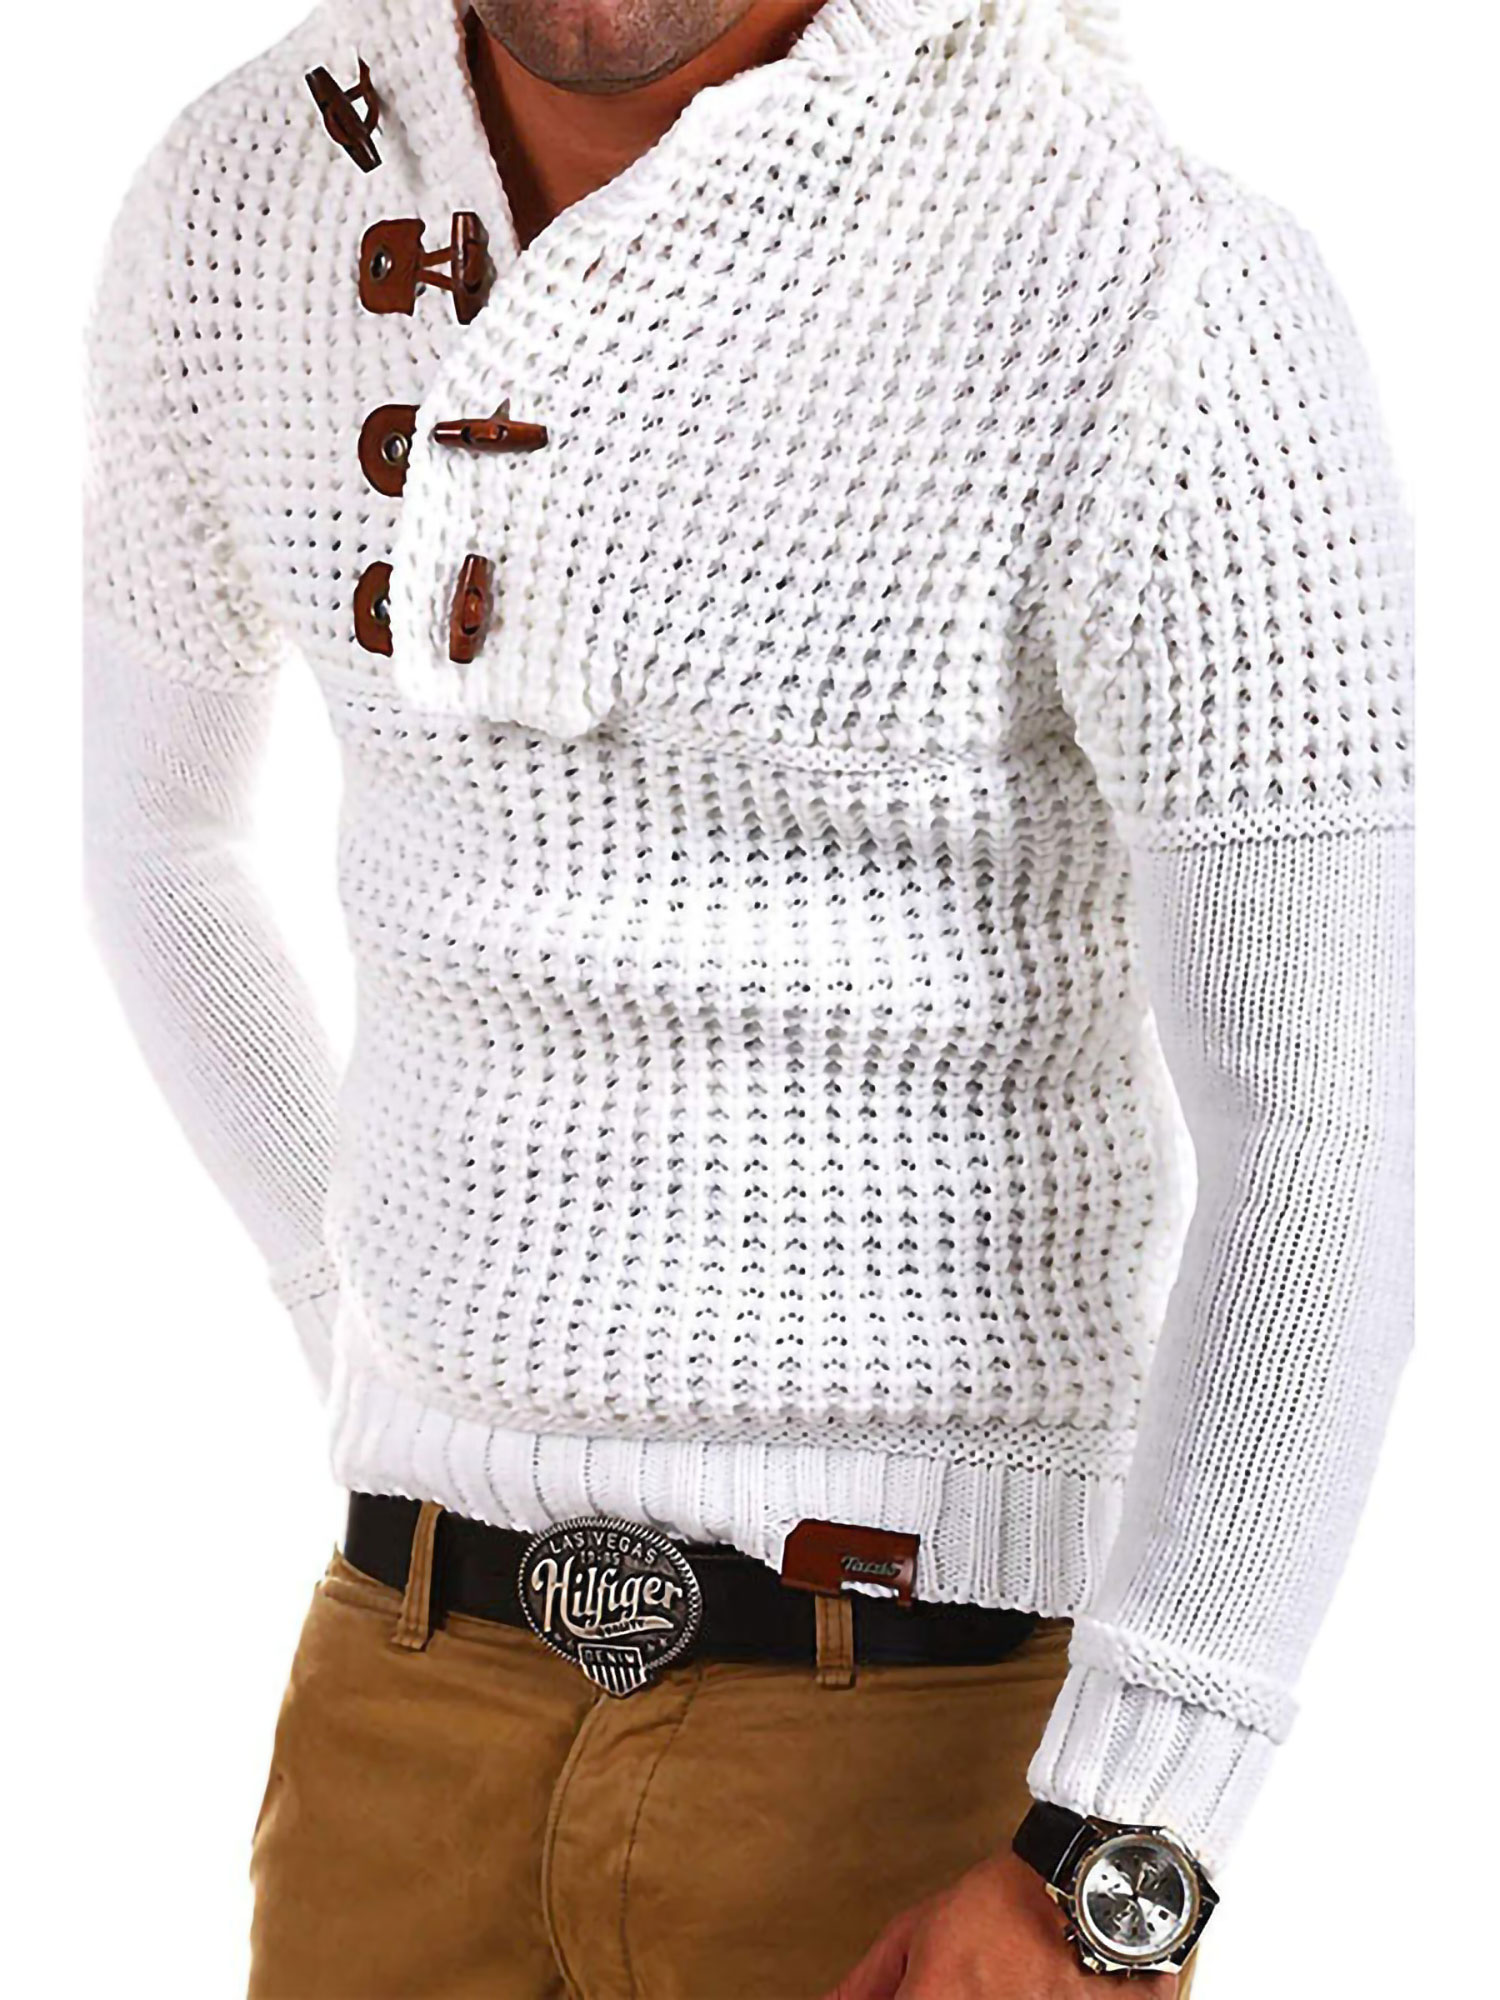 Avamo Mens V Neck Knitted Workout Pullover Sweater Cable Knit Jumper Adults Stylish Knitwear Horn Button Sweaters with Hood - image 1 of 2